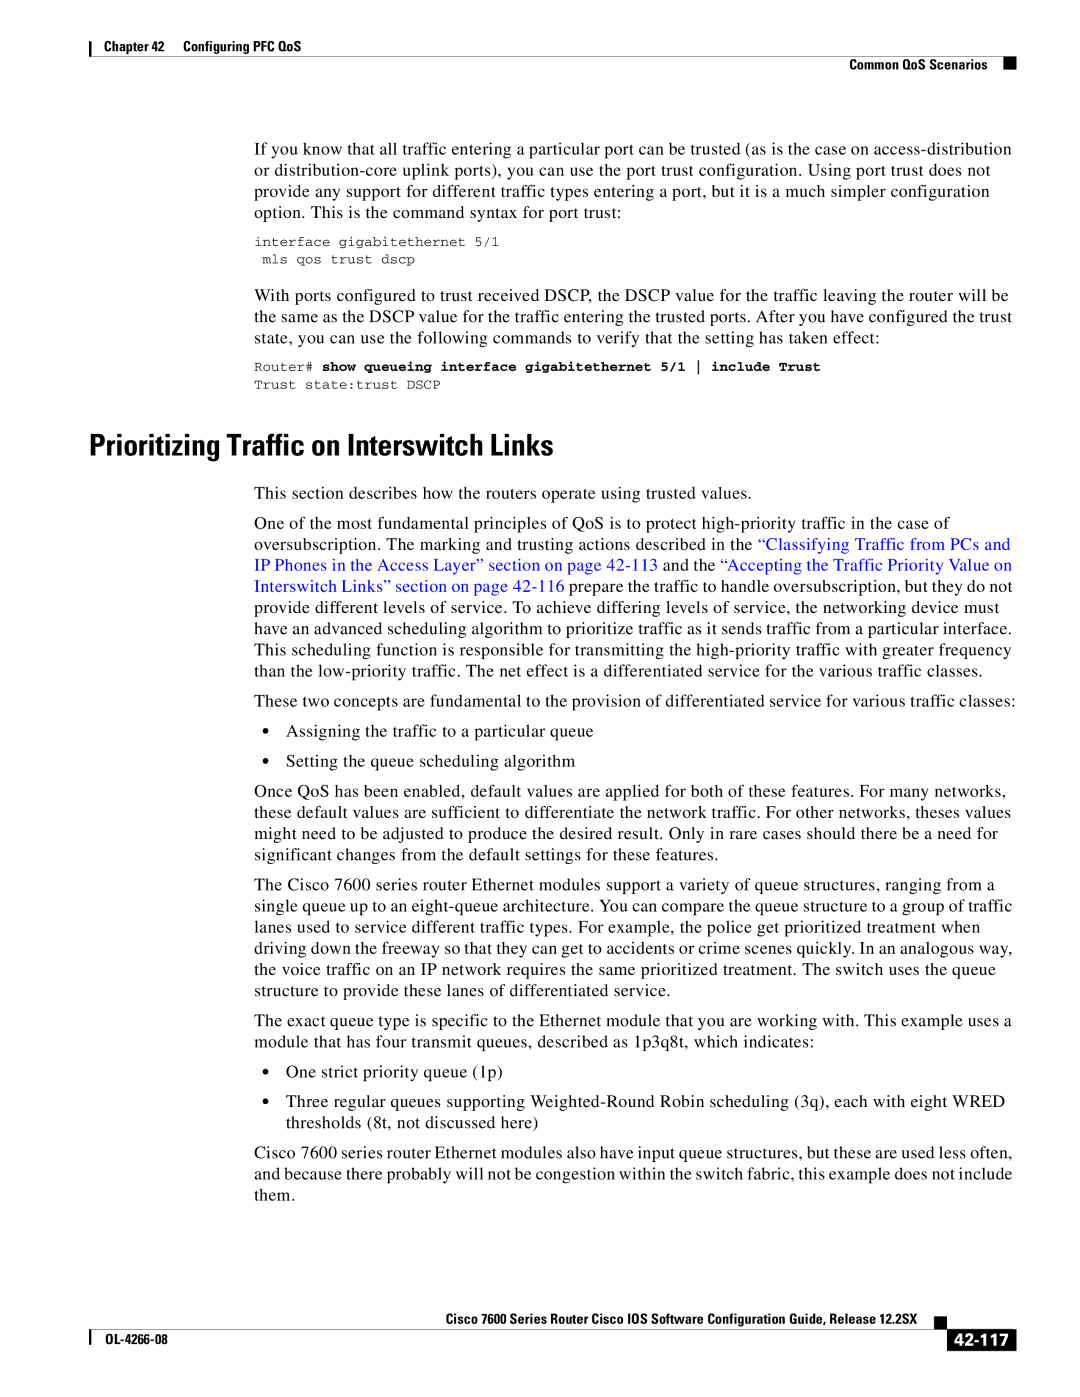 Cisco Systems OL-4266-08 manual Prioritizing Traffic on Interswitch Links, 42-117 